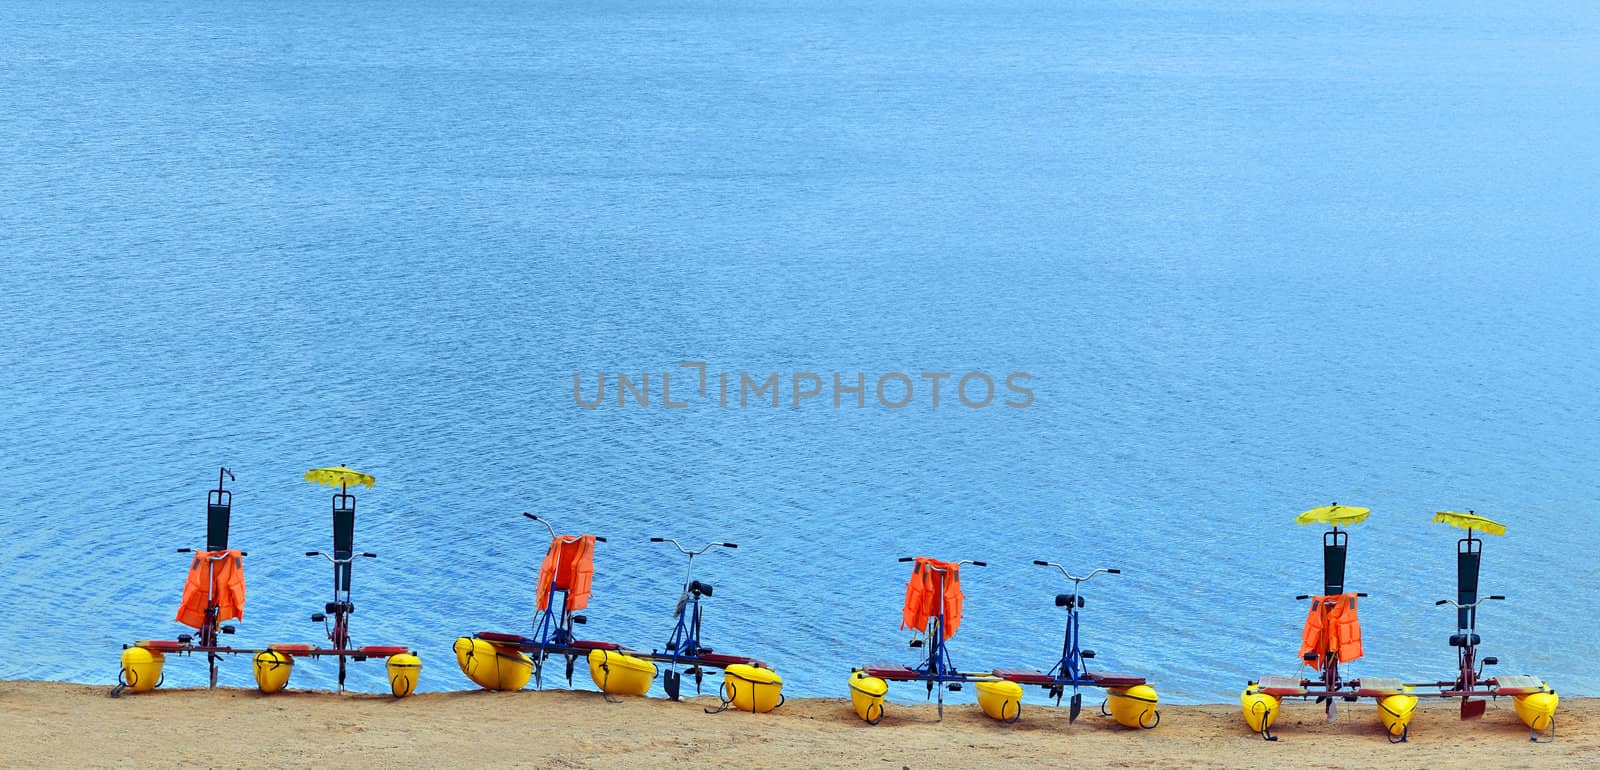 Few pedalos parked on the beach